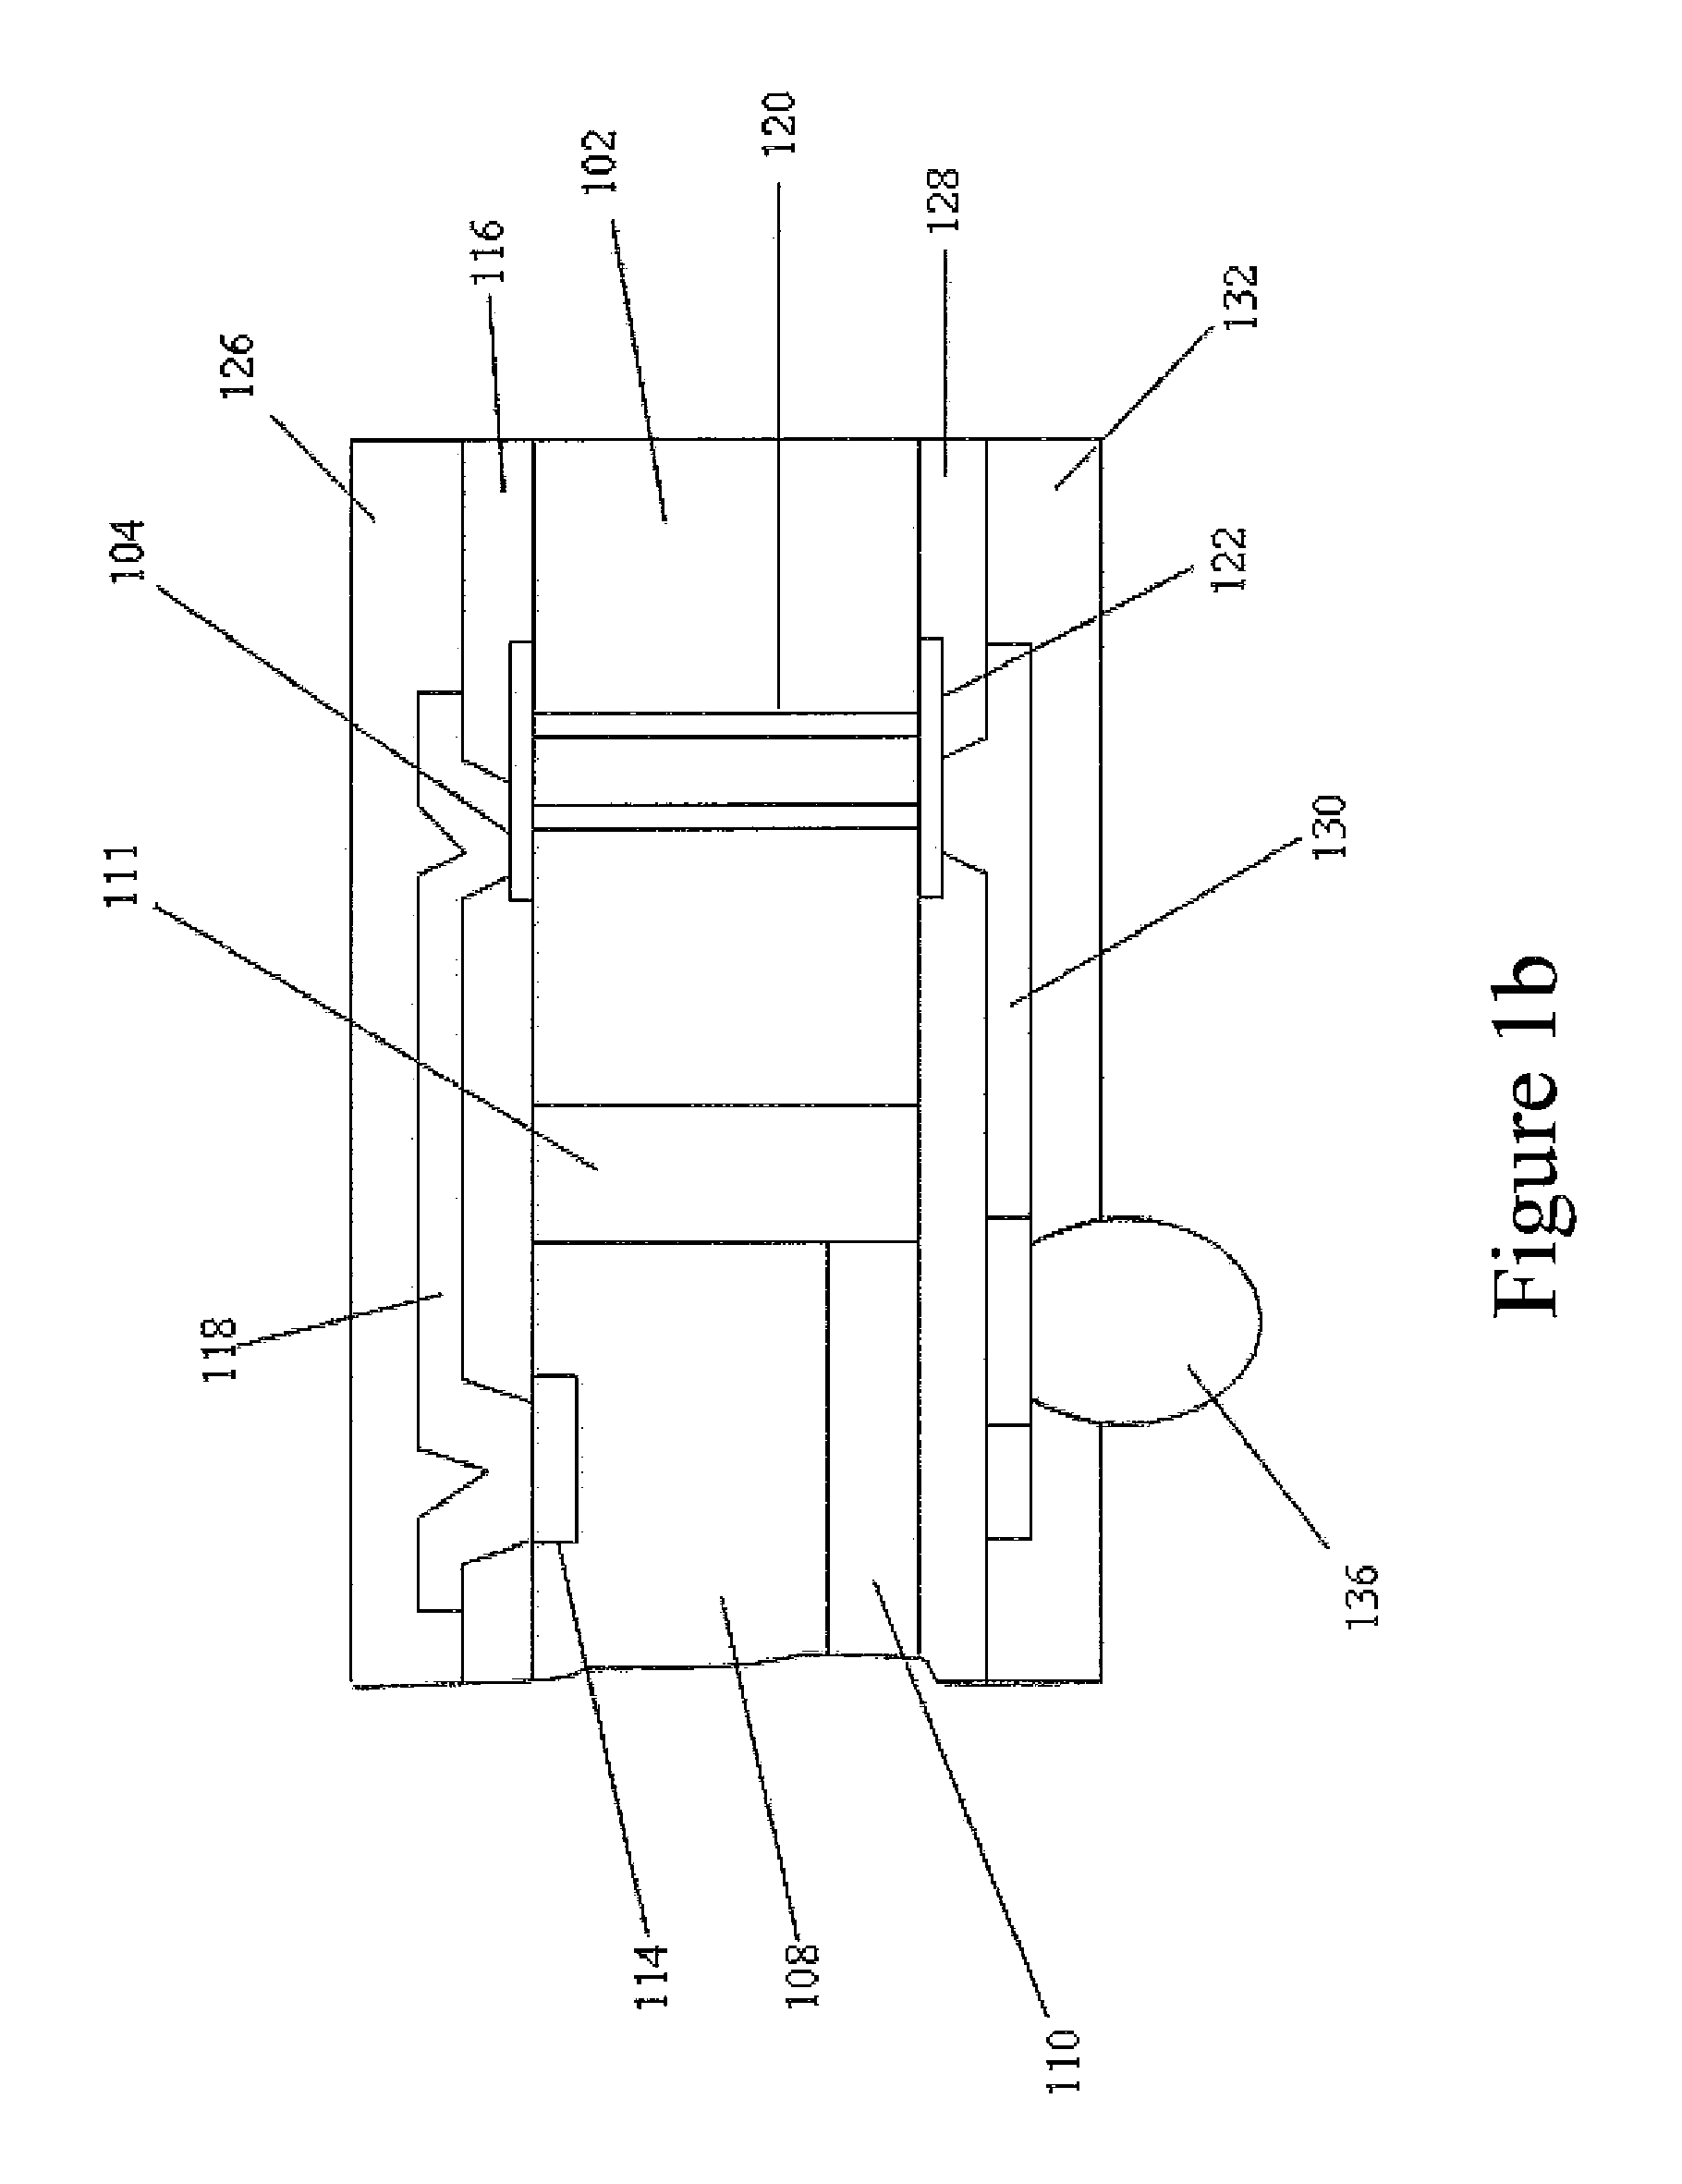 Semiconductor device package with die receiving through-hole and dual build-up layers over both side-surfaces for wlp and method of the same